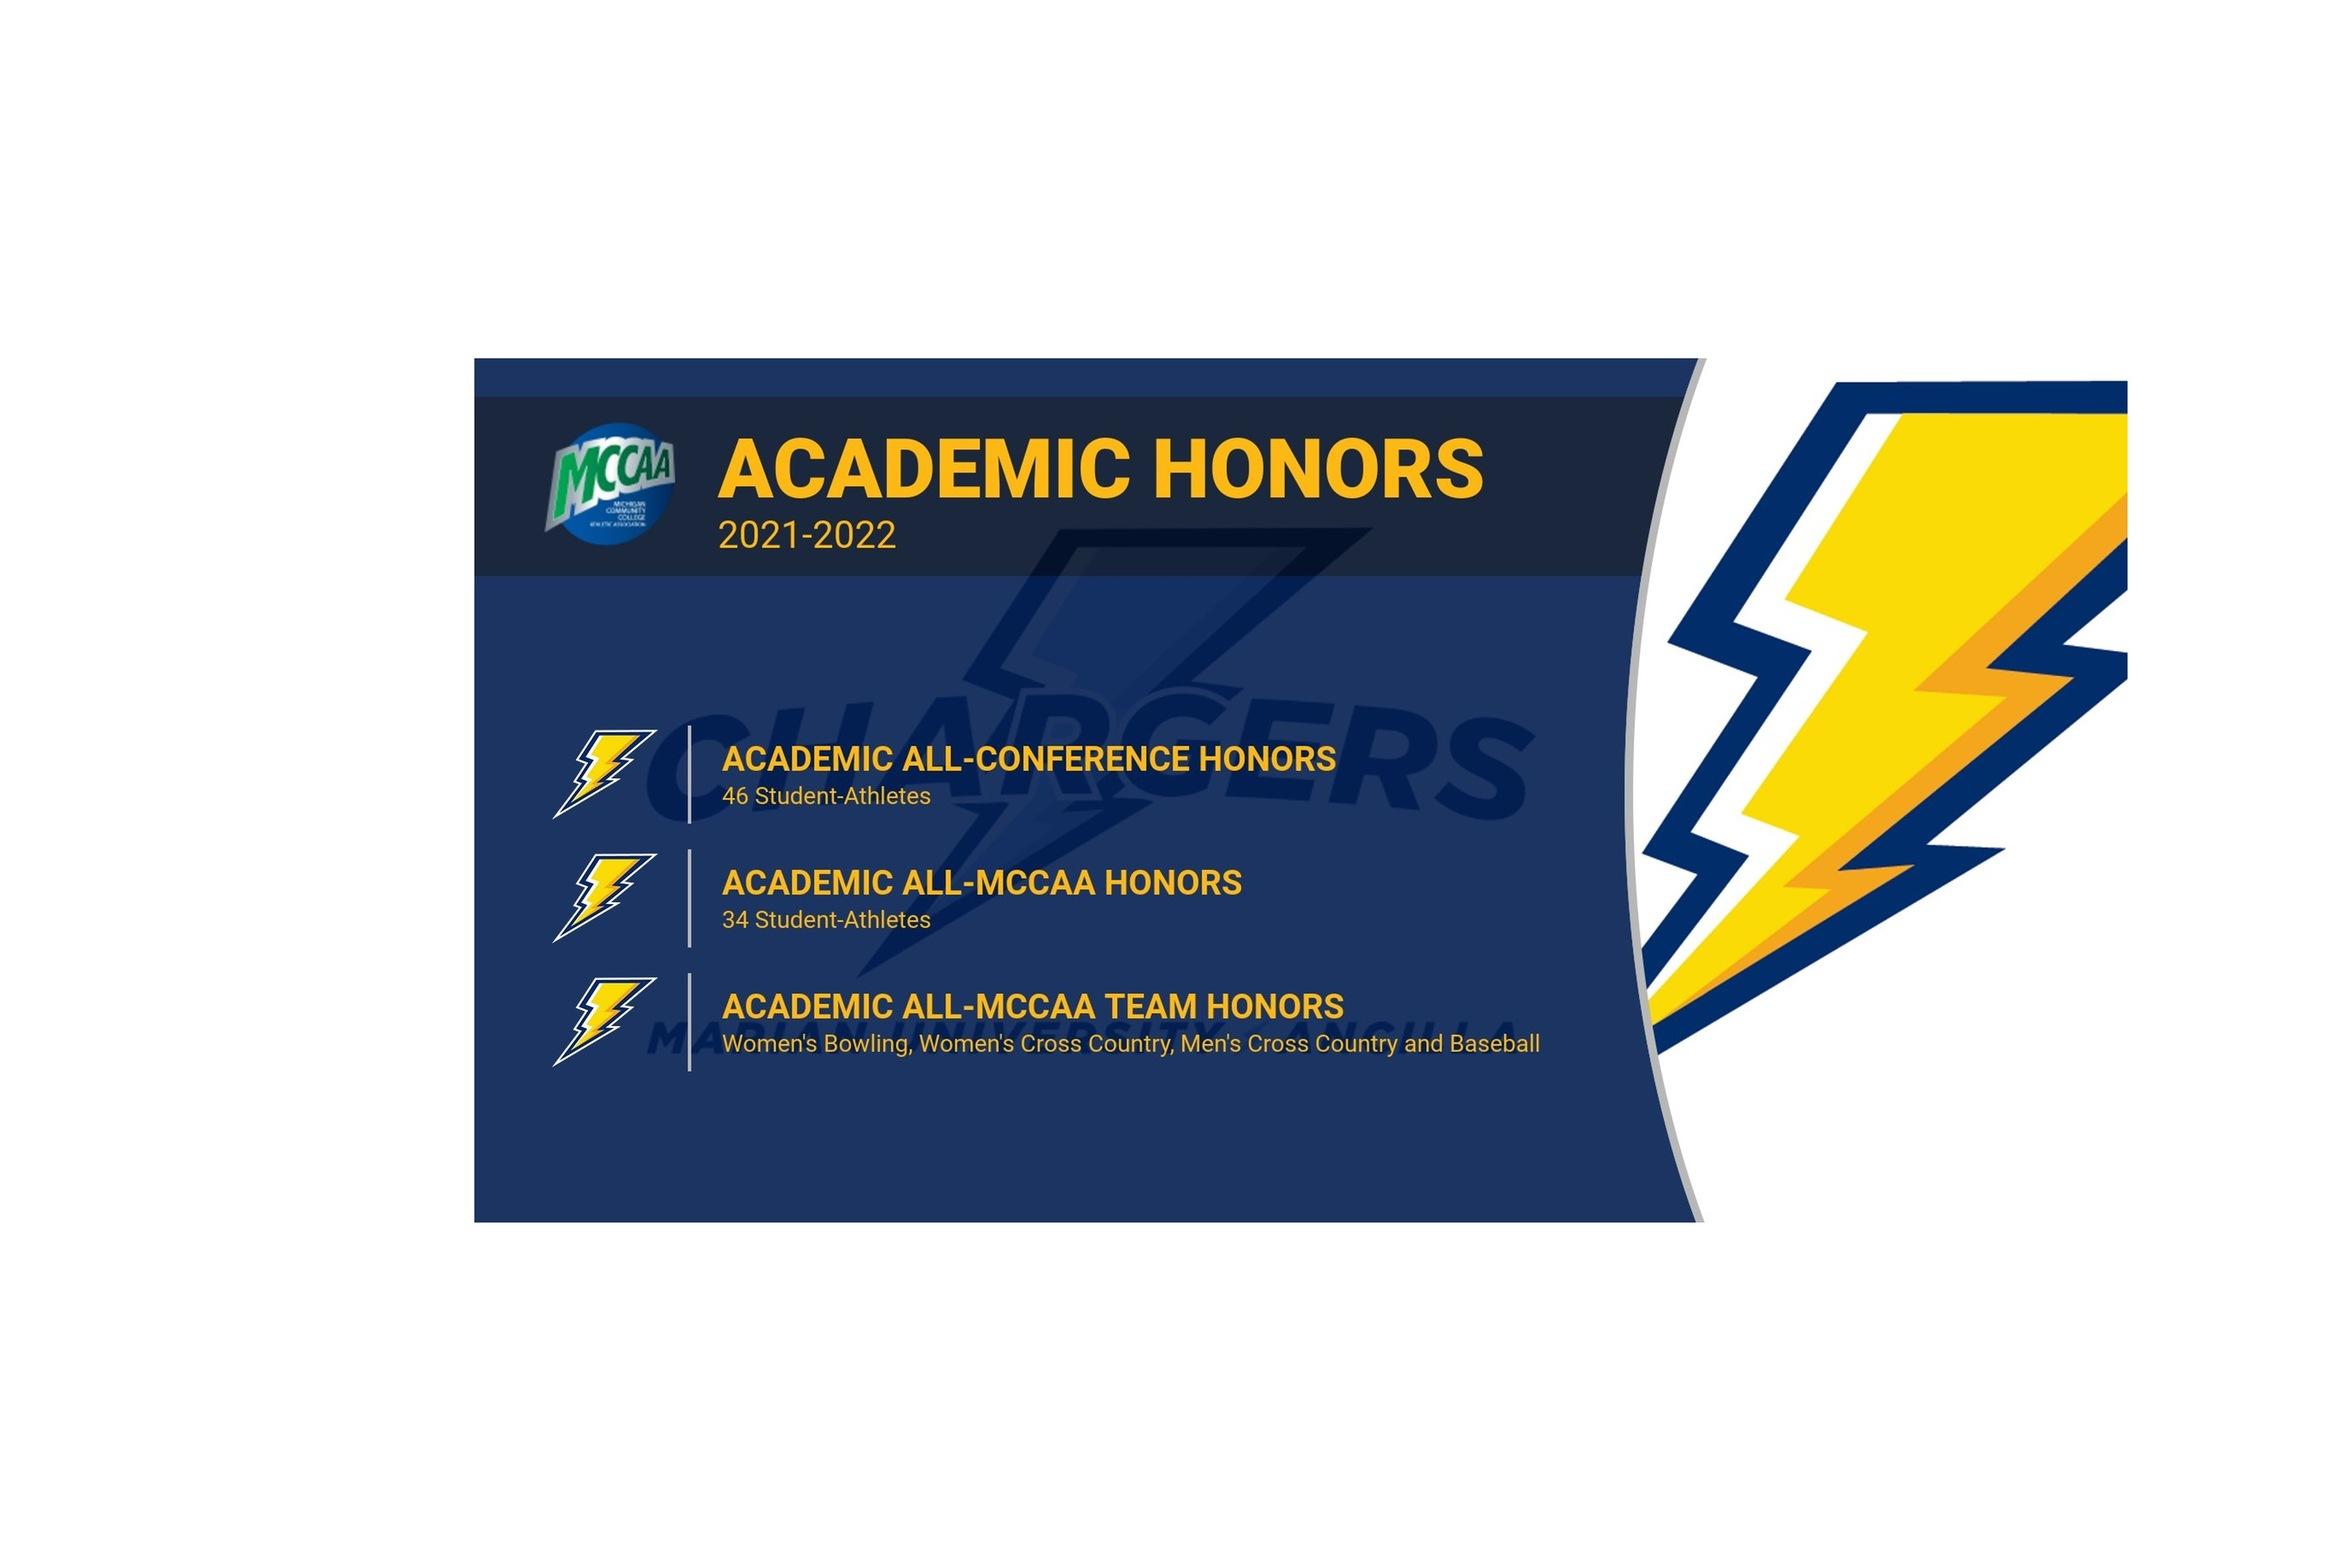 Chargers put the Student in Student-Athlete with Academic Honors